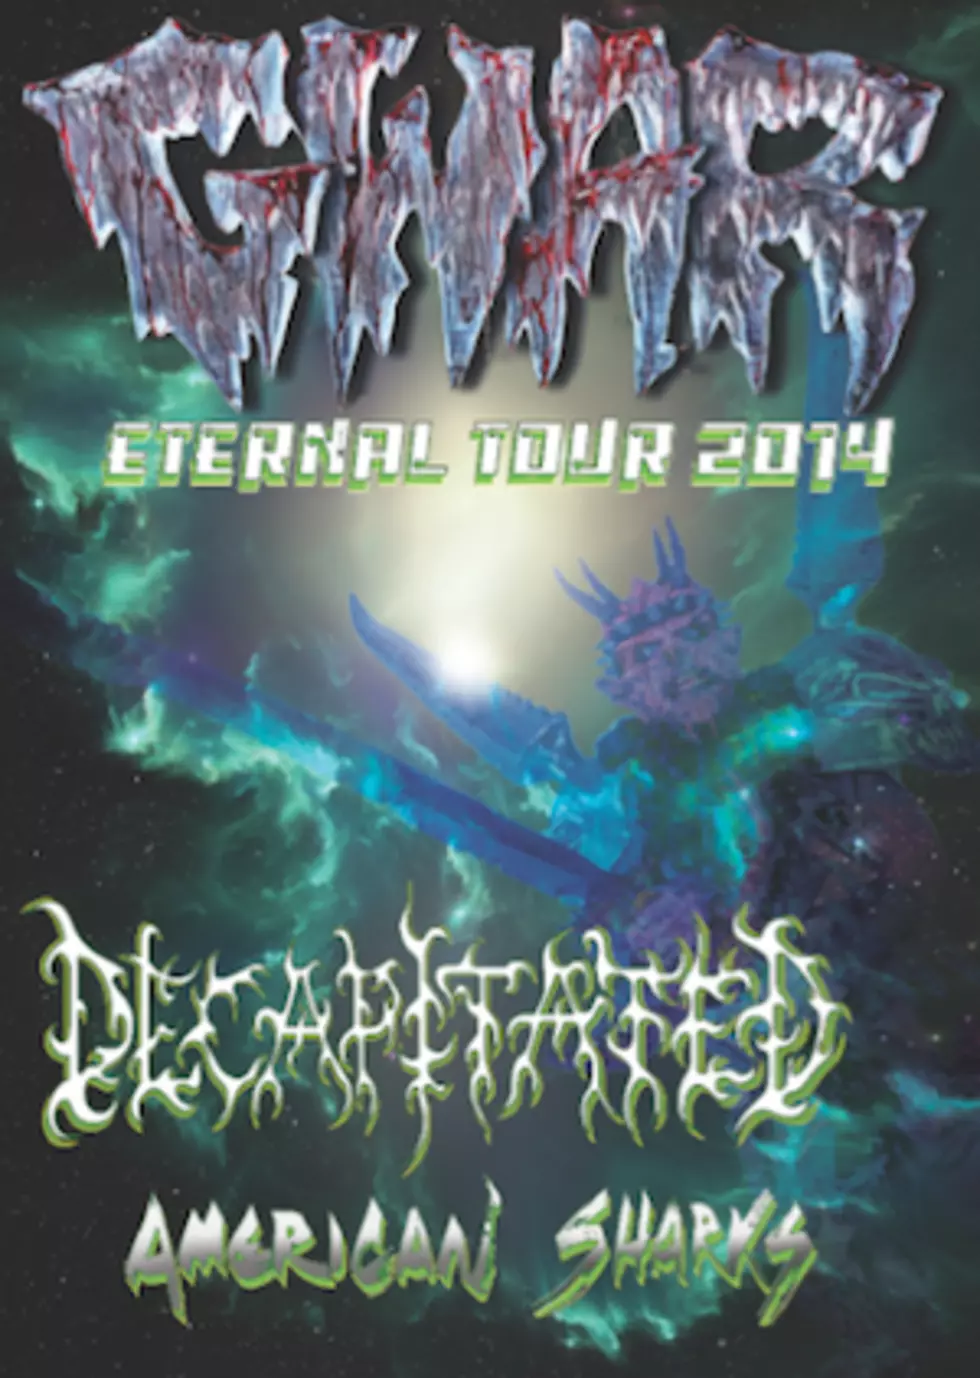 GWAR Announce 2014 North American Tour with Corrosion of Conformity + Decapitated